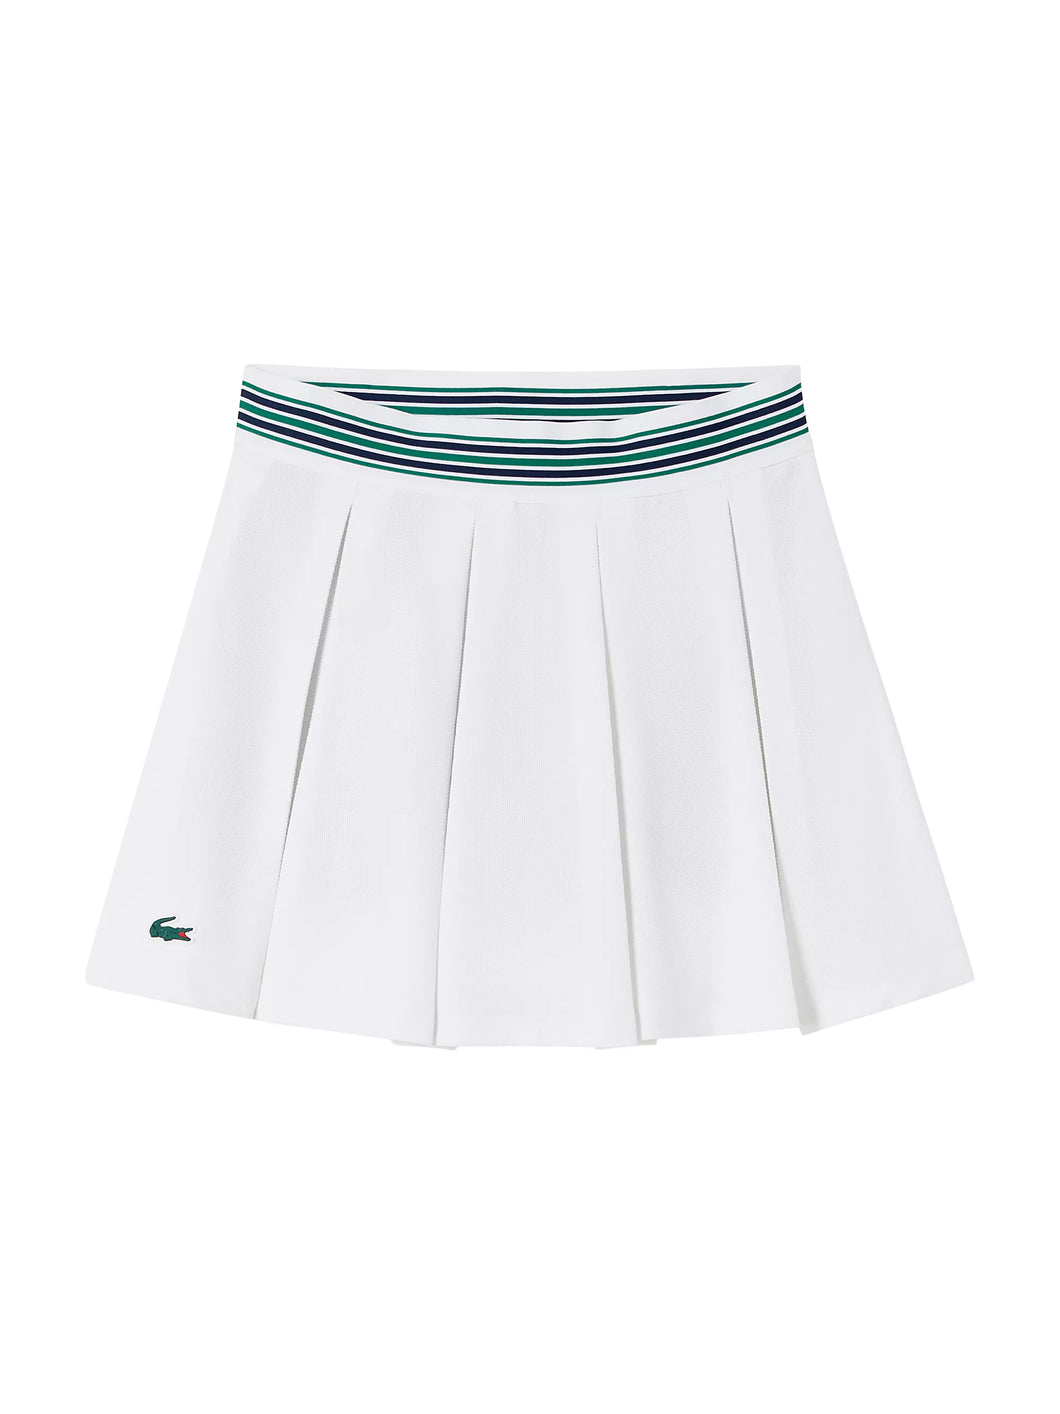 Lacoste Performance Pique Pleated Tennis Skirt